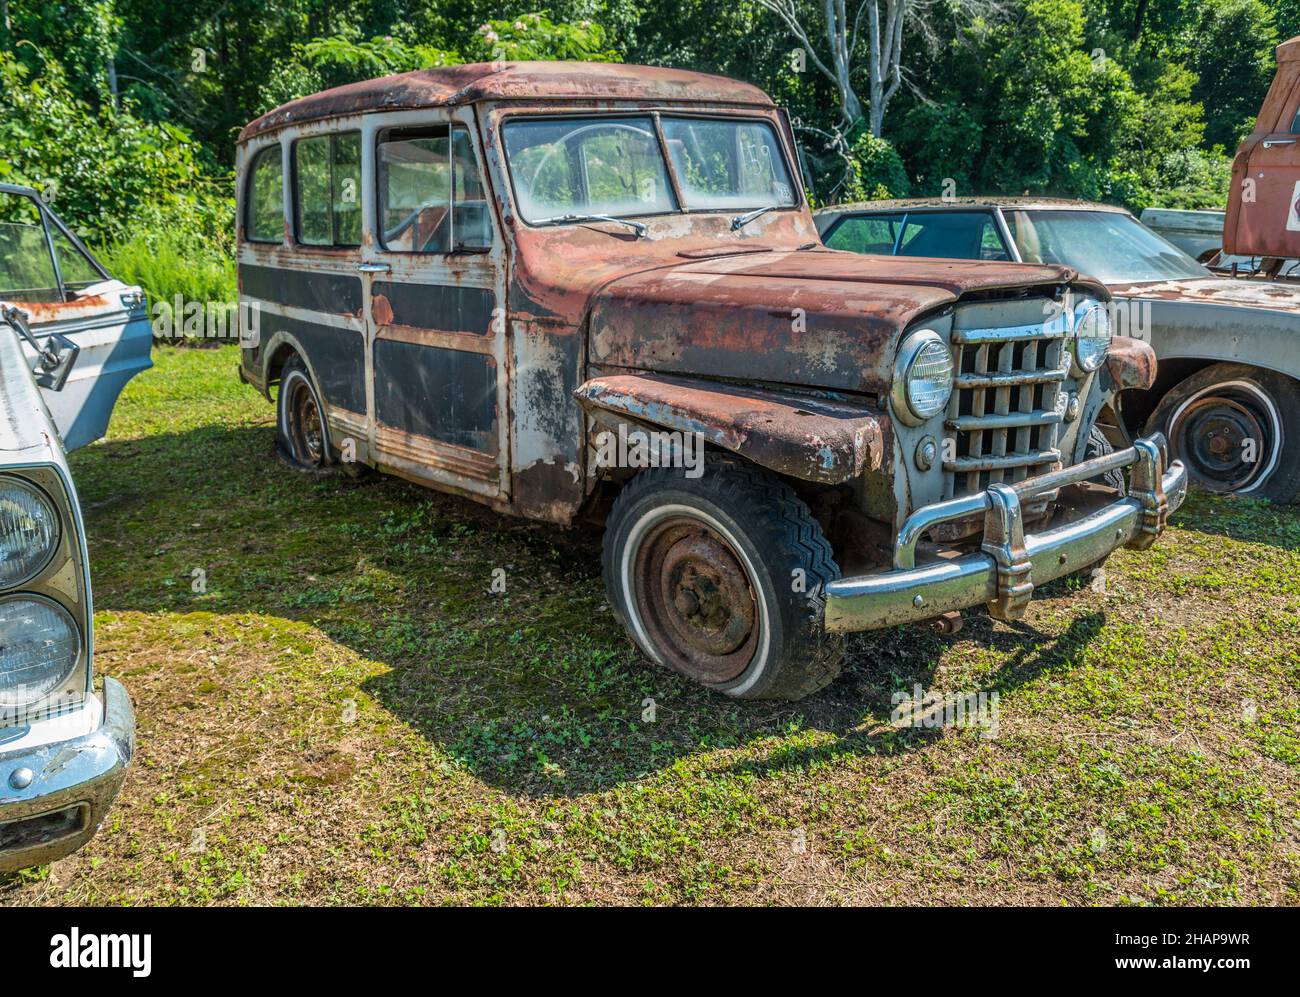 Vintage old rusty willys jeep station wagon parked outdoors fully intact with flat tires waiting for restoration all original with patina Stock Photo